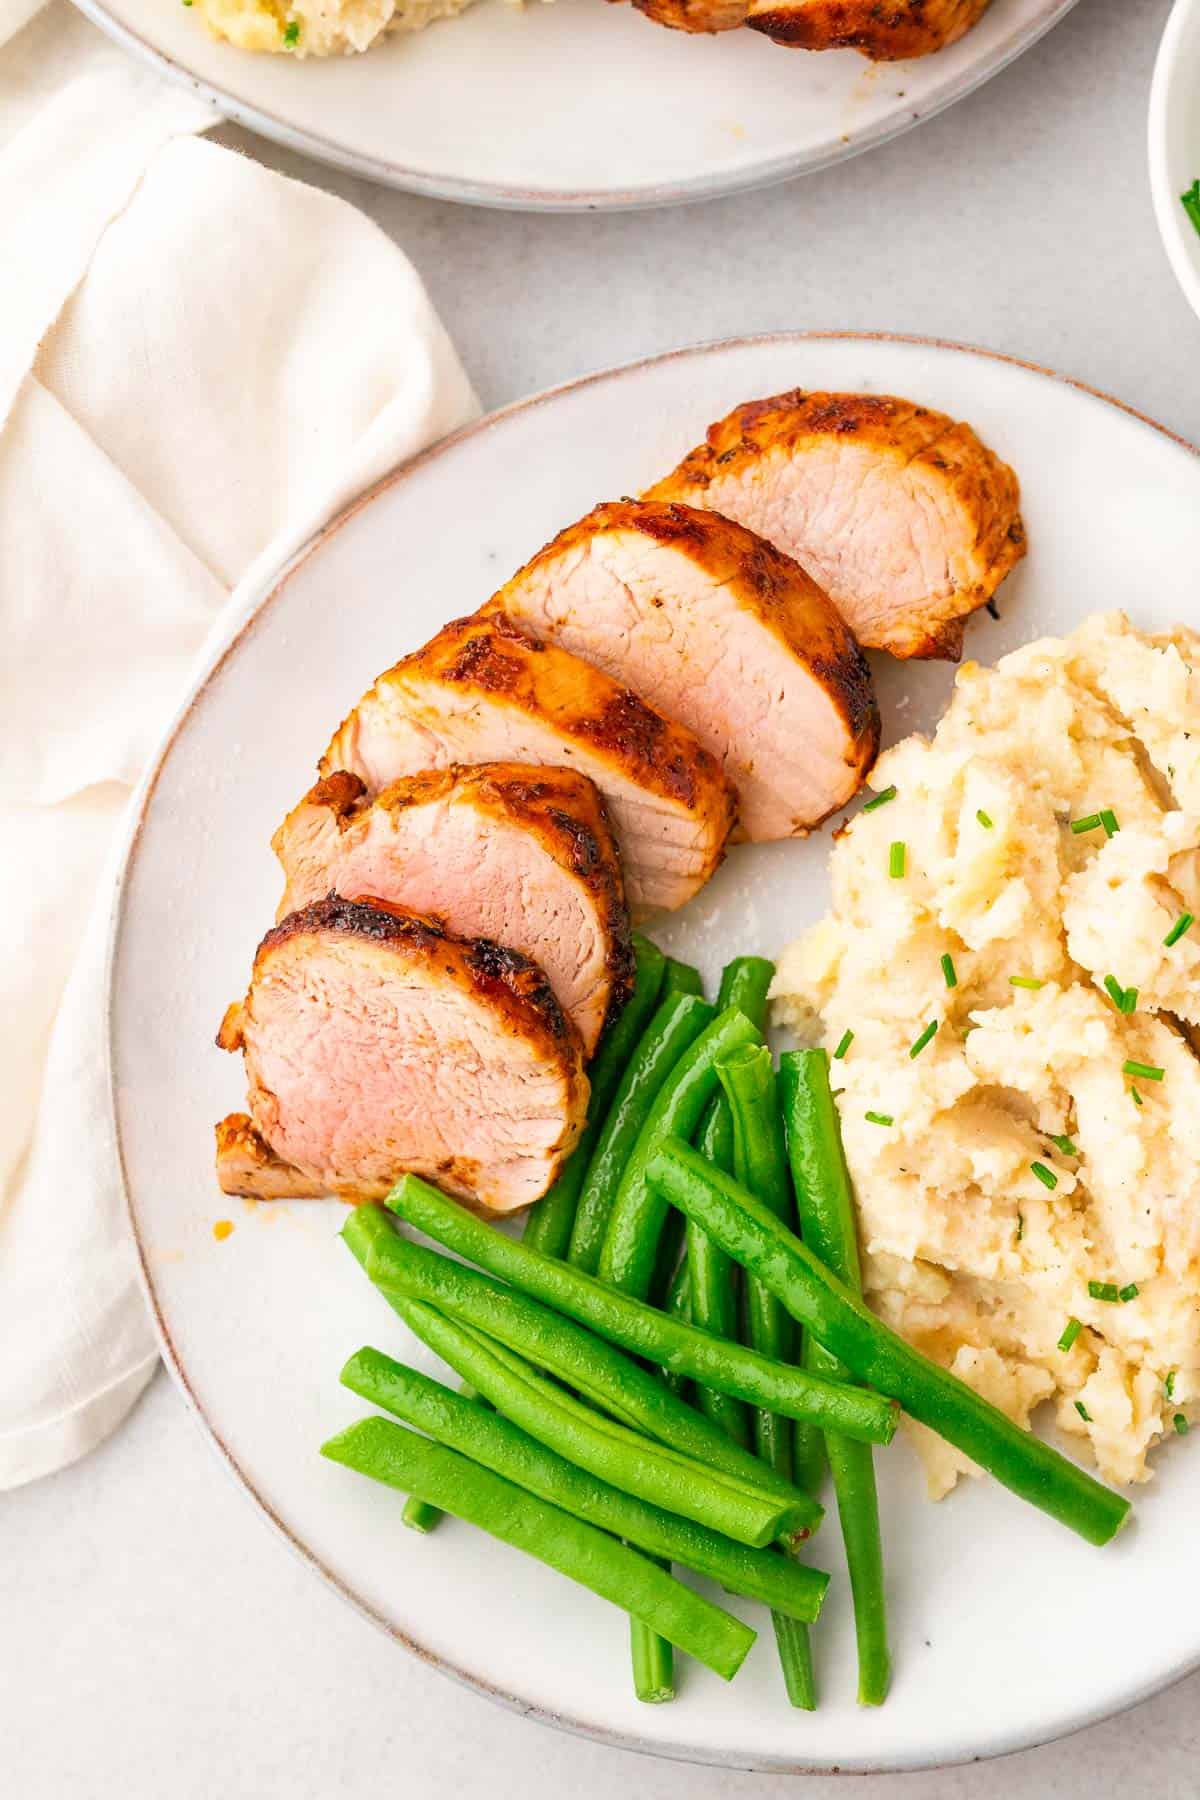 sliced cooked pork tenderloin on a plate served with mashed potatoes and green beans, all garnished with chopped chives